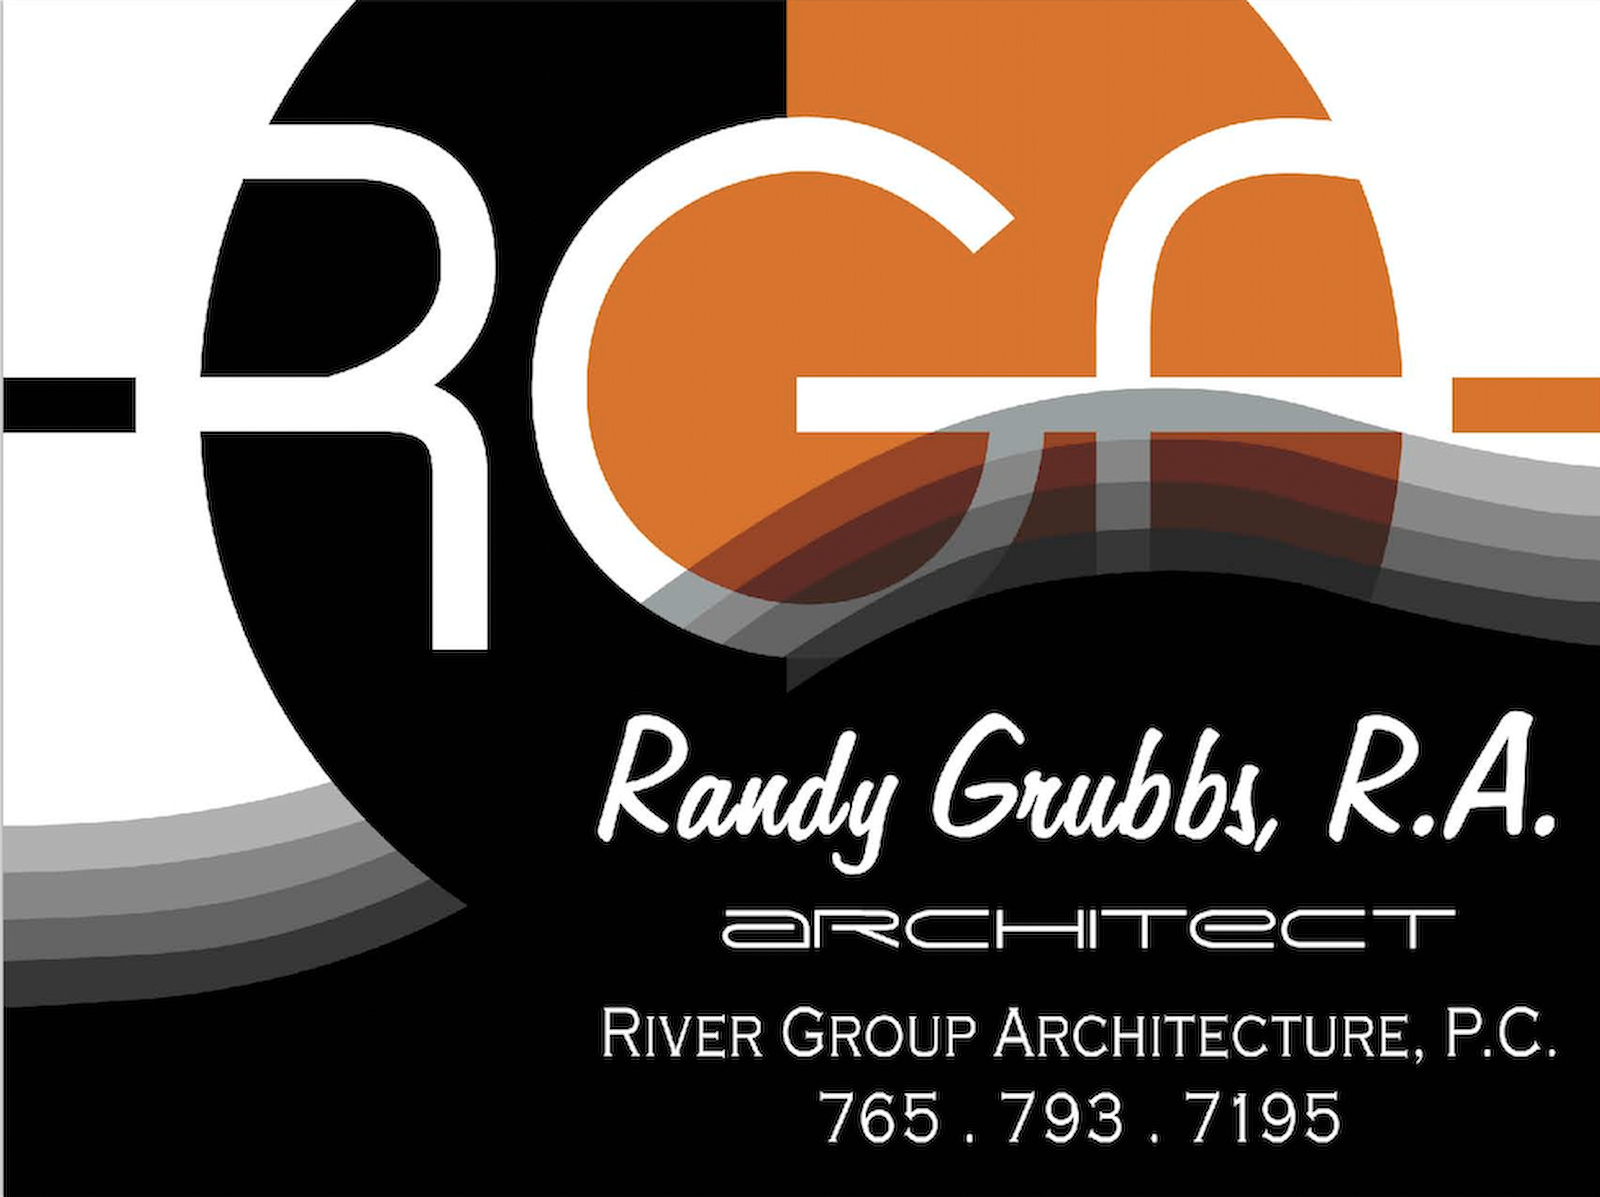 River Group Architecture